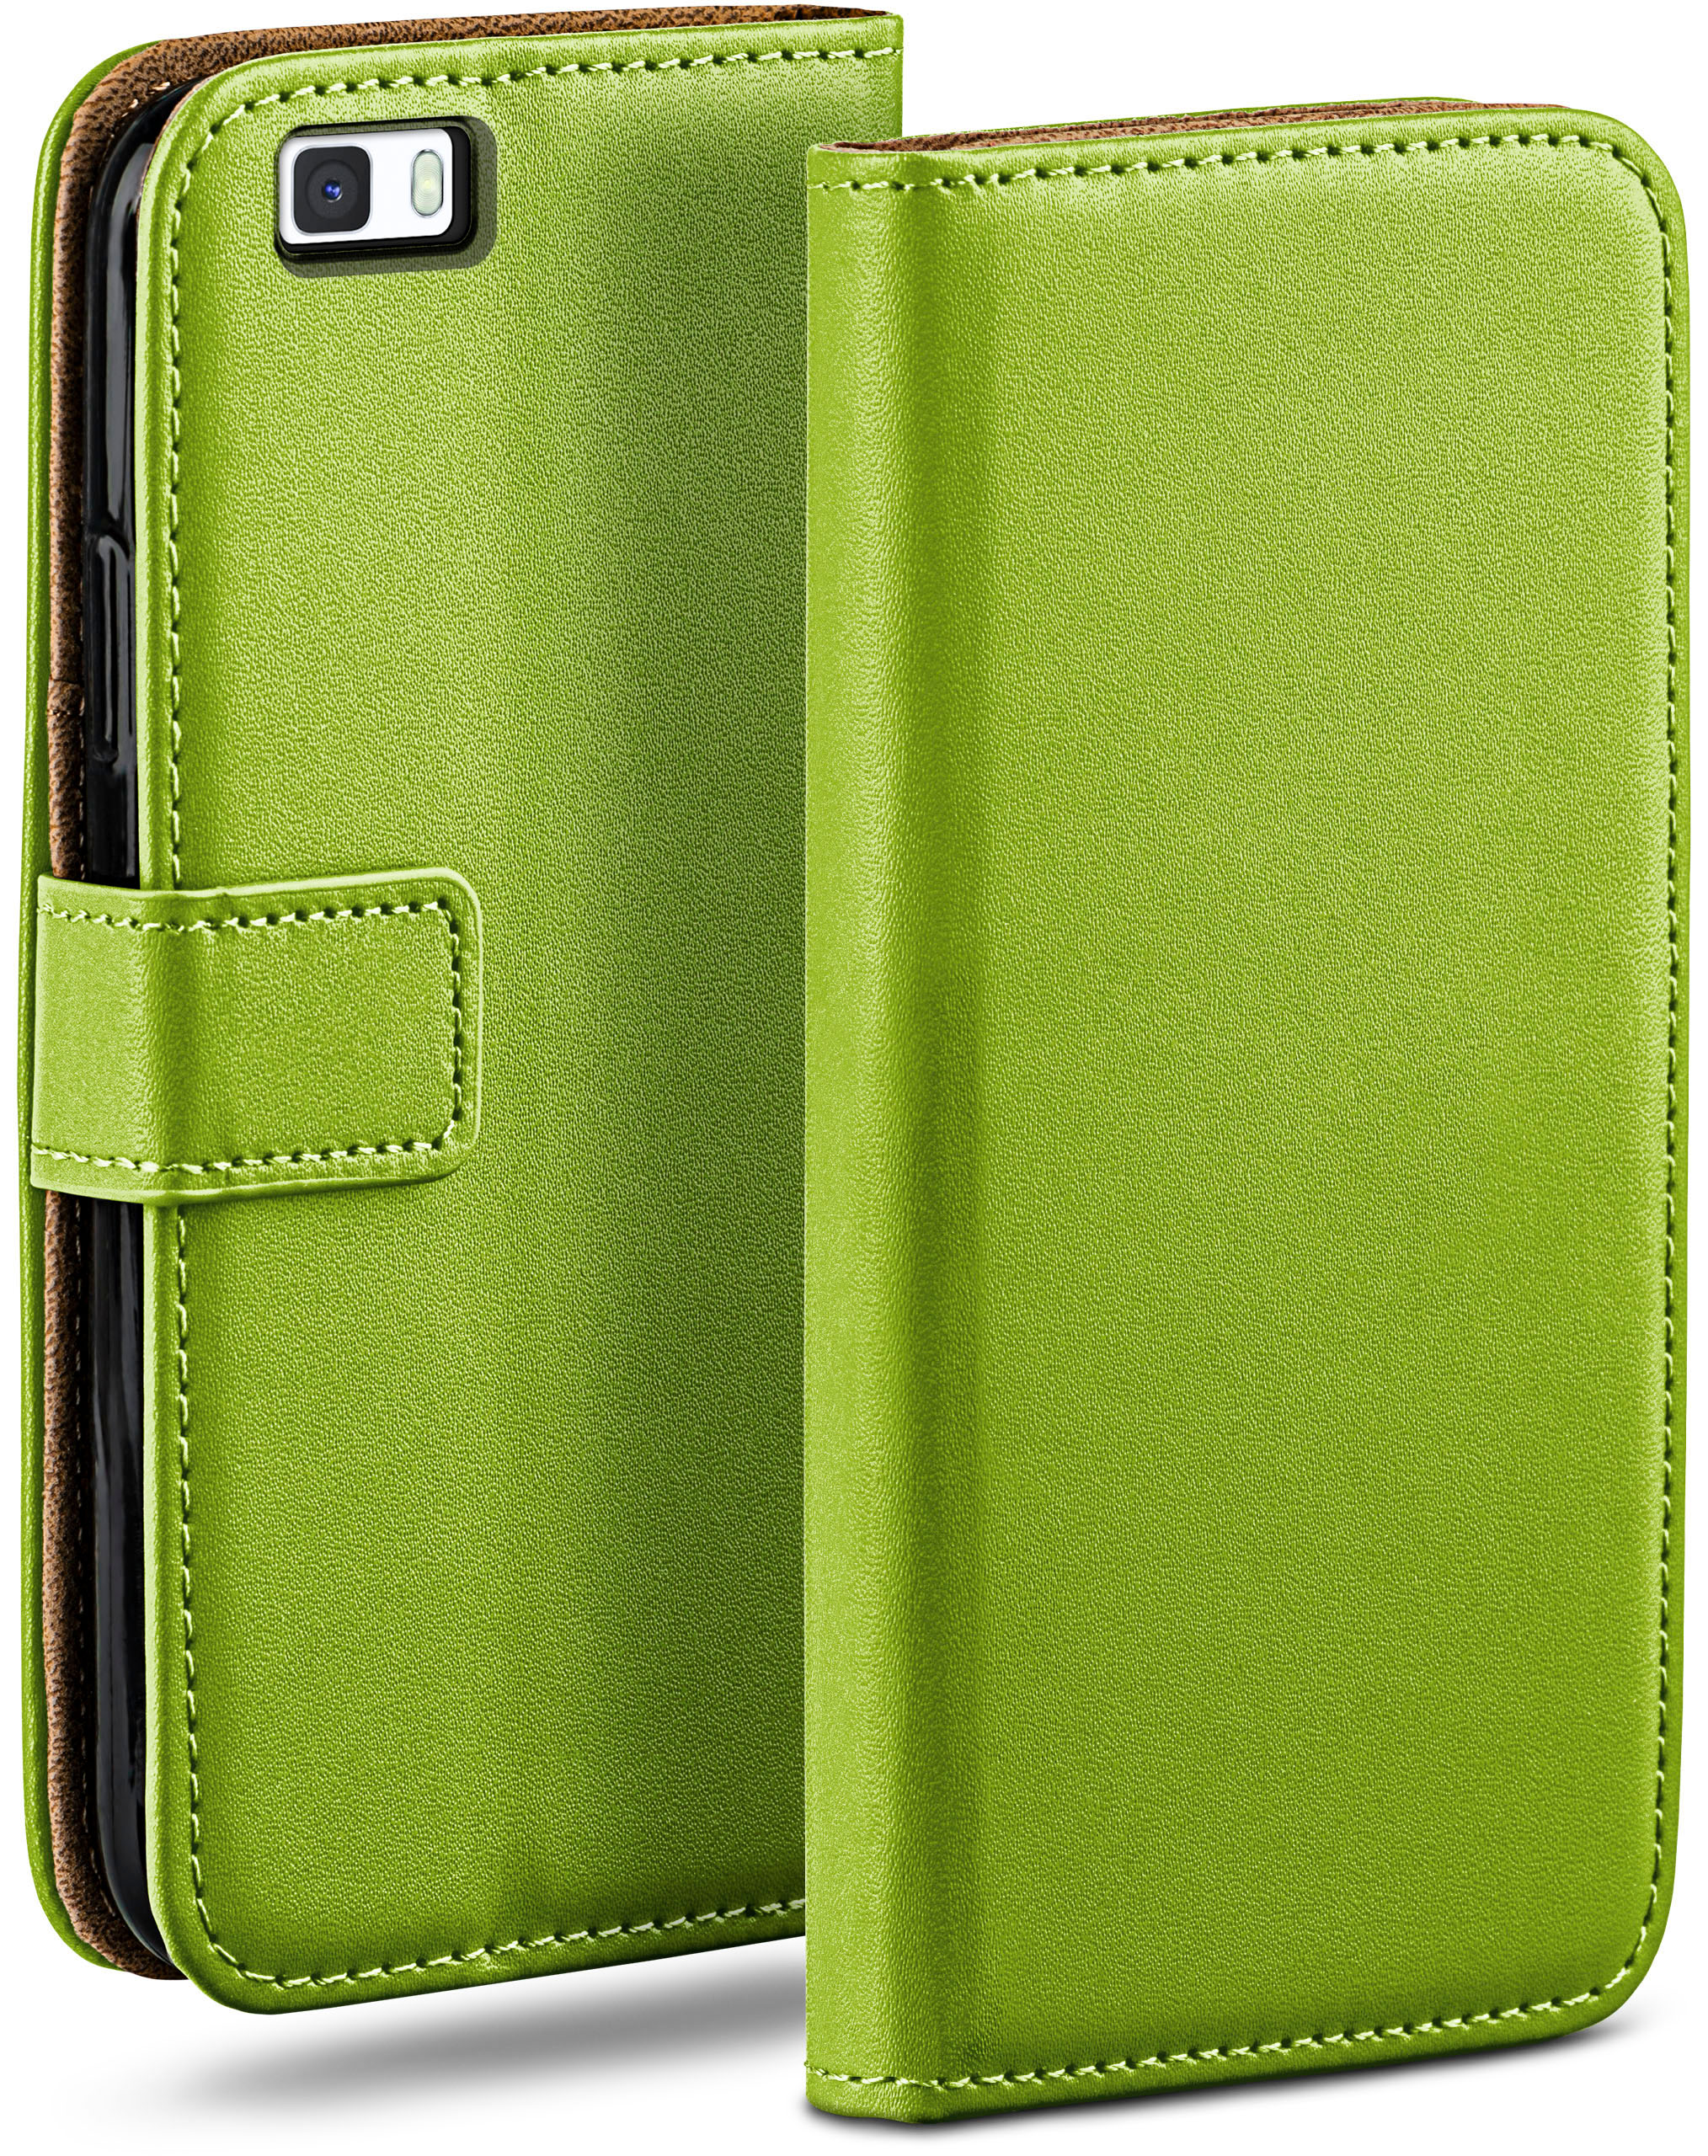 Lime-Green Bookcover, MOEX Book Huawei, P8 Case, 2015, Lite